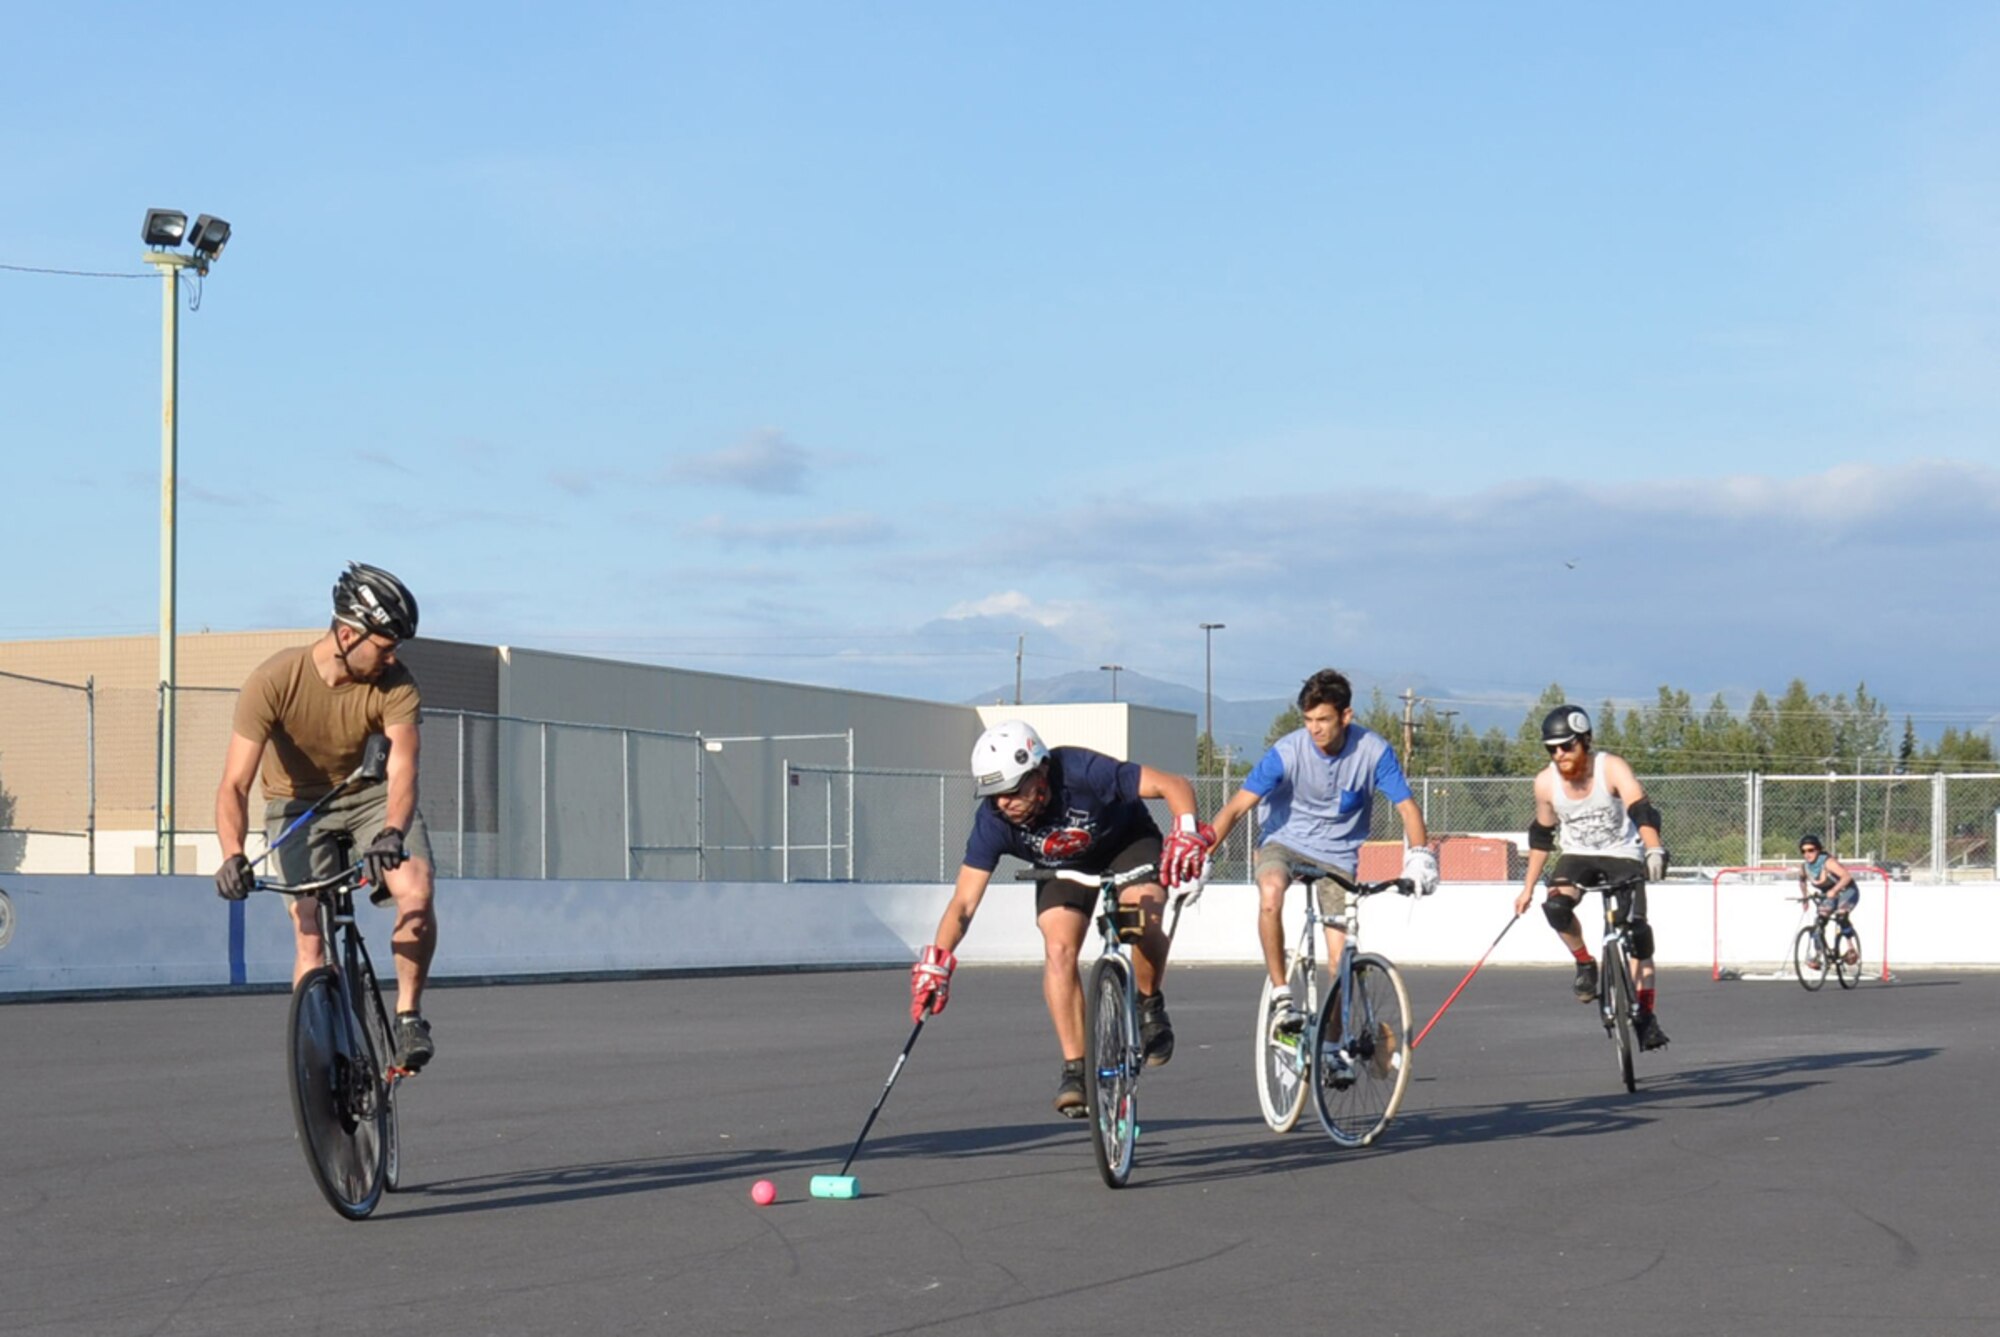 Staff Sgt. Jonathan MacPherson (blue shirt), races toward the goal with defenders in hot pursuit during a bike polo game July 31, 2014 in Anchorage, Alaska. MacPherson is a 673rd Logistics Readiness Squadron fuels service center controller who recently qualified to compete in the World Hardcourt Bike Polo Championships in Montpellier, France, at the end of August. (U.S. Air Force photos/Staff Sgt. Wes Wright)